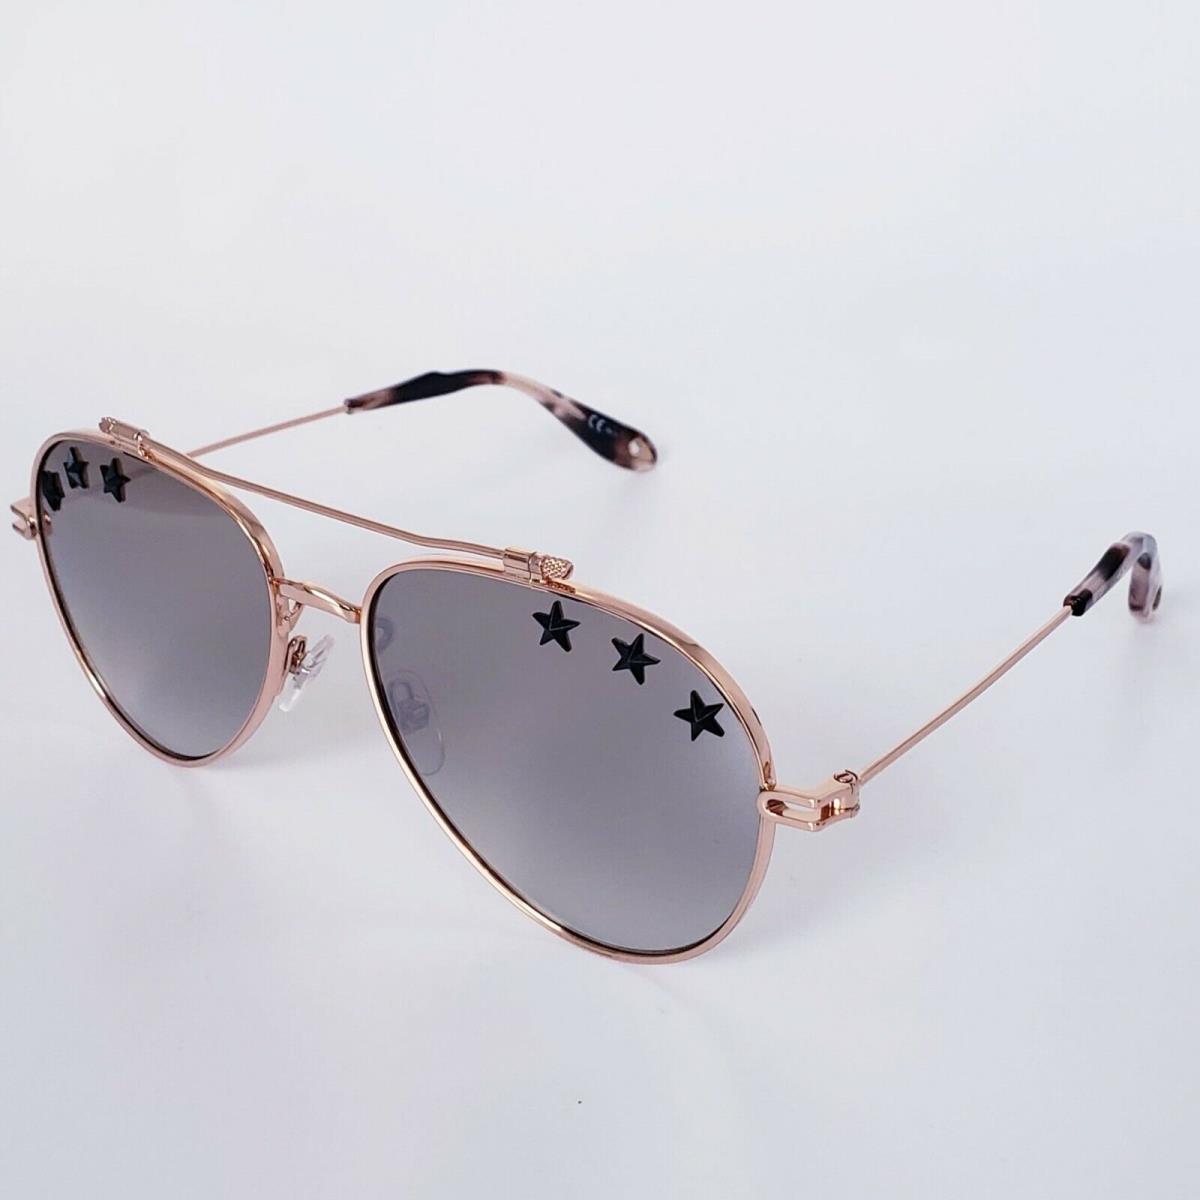 Givenchy sunglasses Star - Frame: Gold, Lens: Brown grey Gradient with Silver mirror effect 0